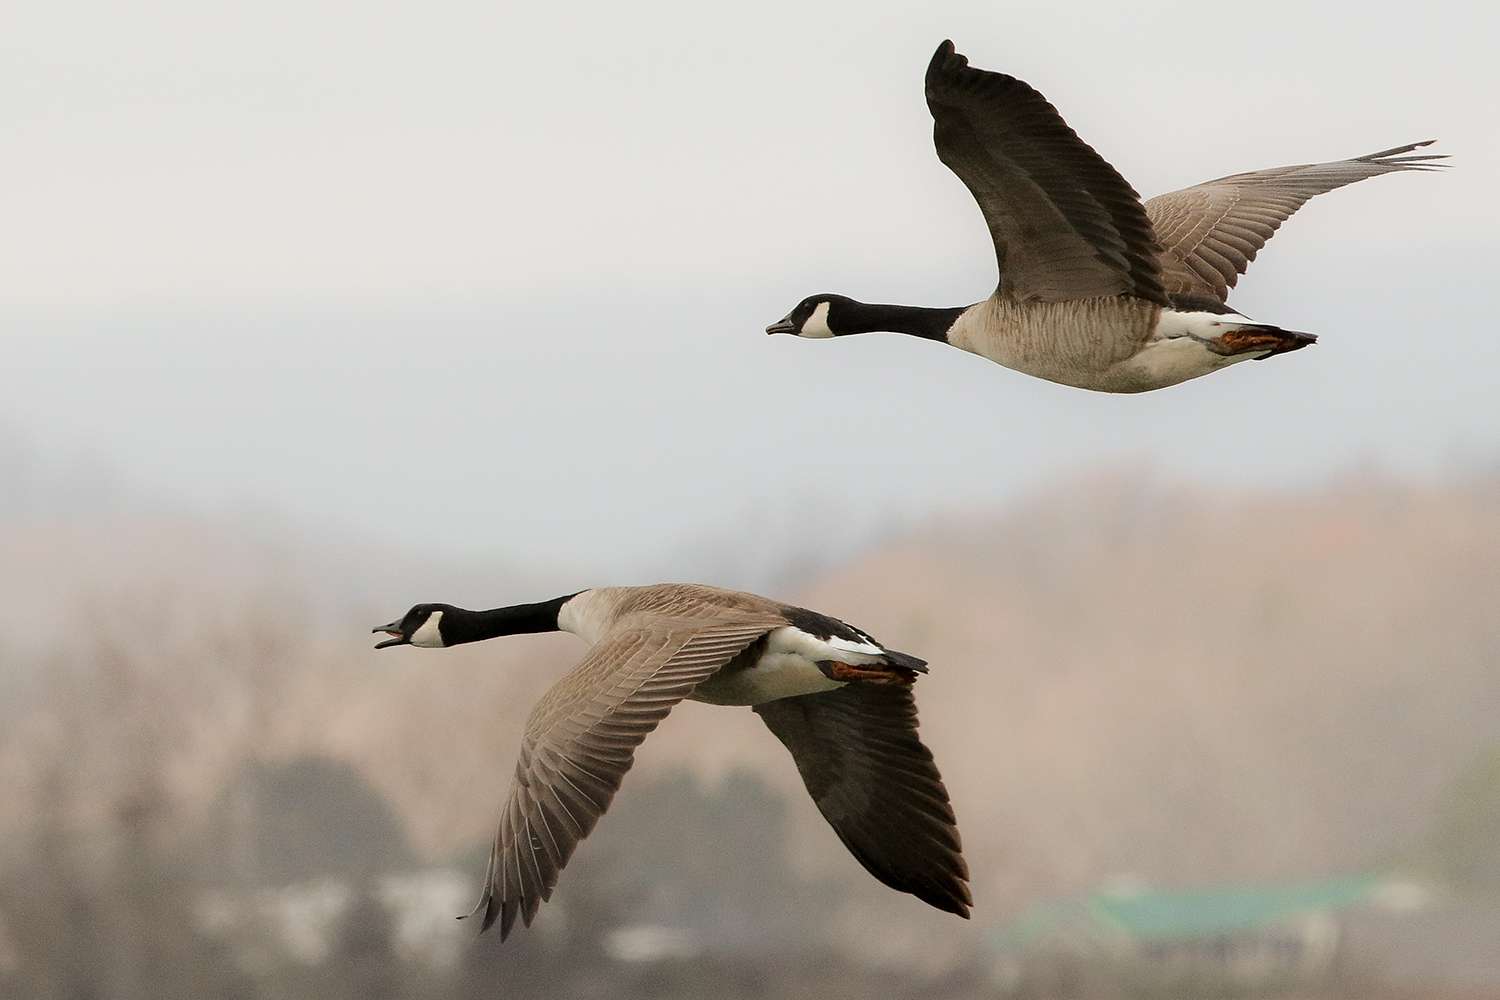 More Canada geese at Cherokee, 2017.
<p>
I won't claim to be a bird expert, so if you see a bird named incorrectly, or unnamed, period, let us know the slide number and correct species name in the comments below. 